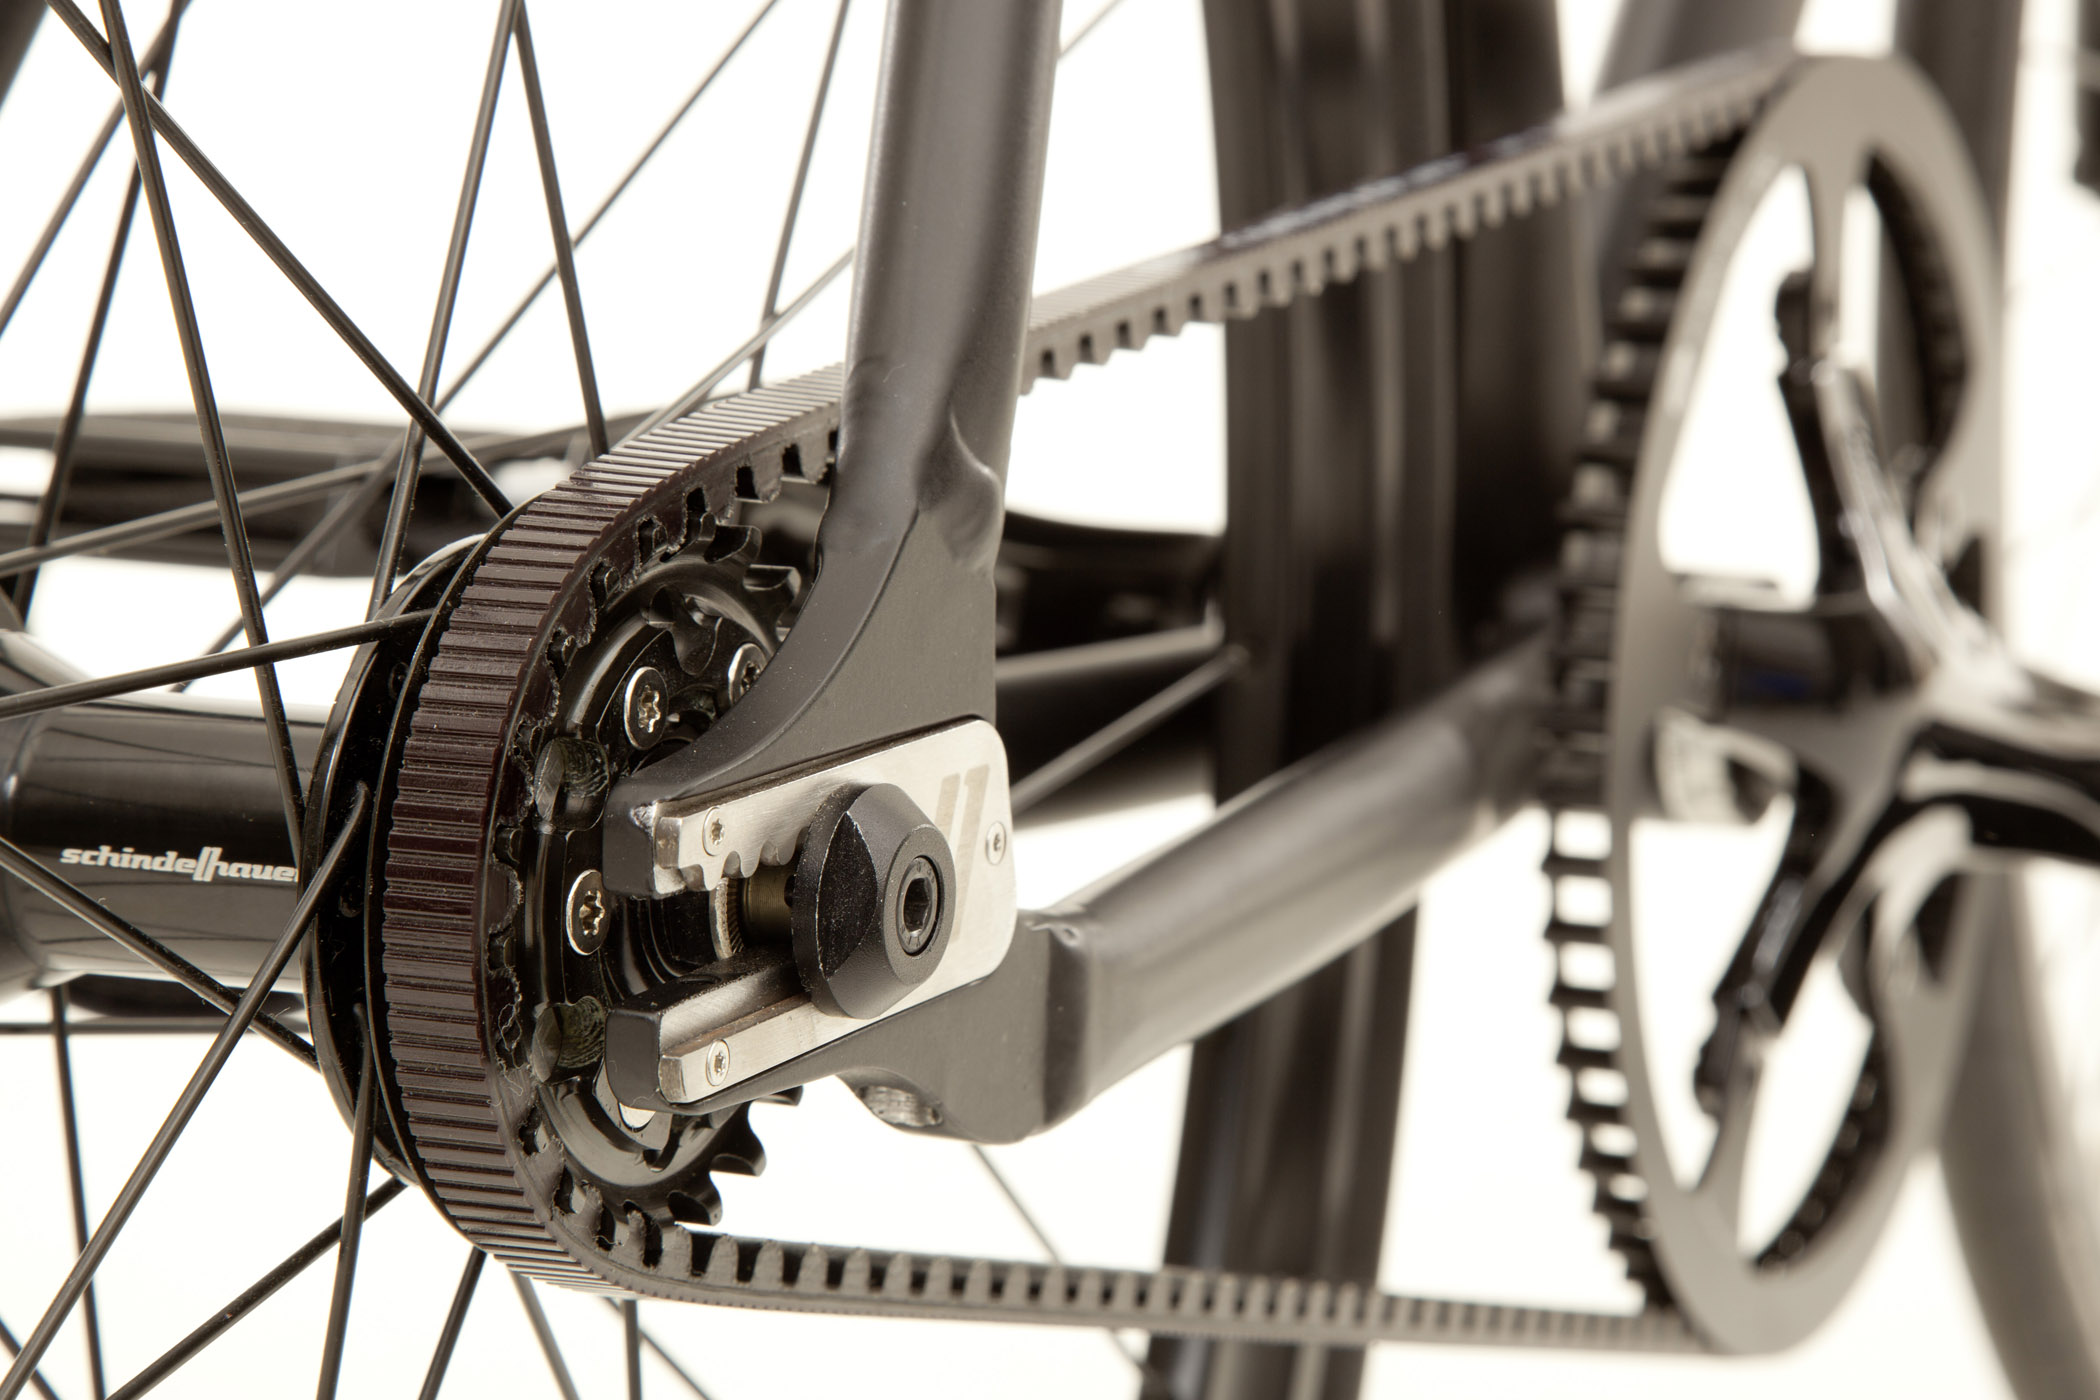 Gates Carbon Drive is a belt driven system for bikes